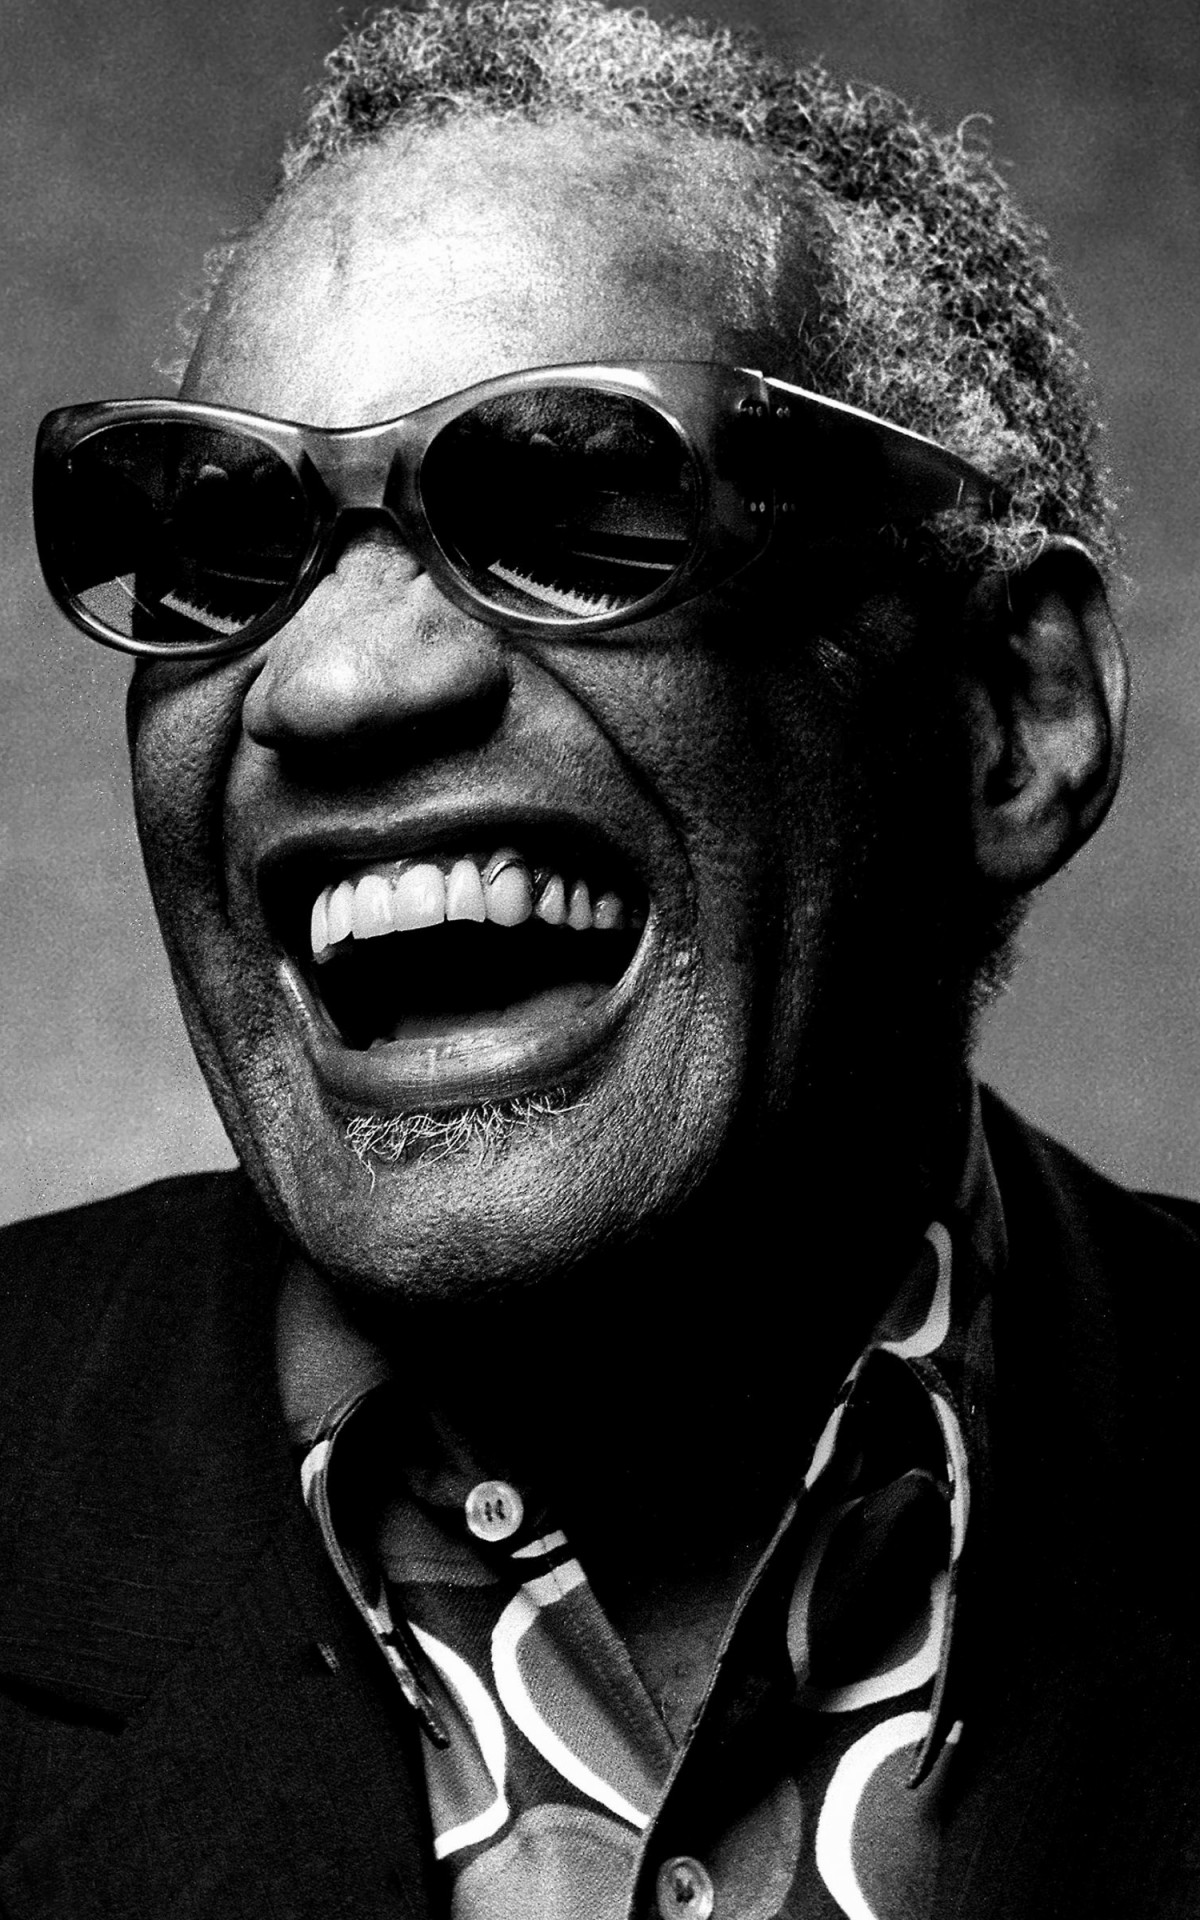 Ray Charles Portrait in Black & White Wallpaper for Amazon Kindle Fire HDX